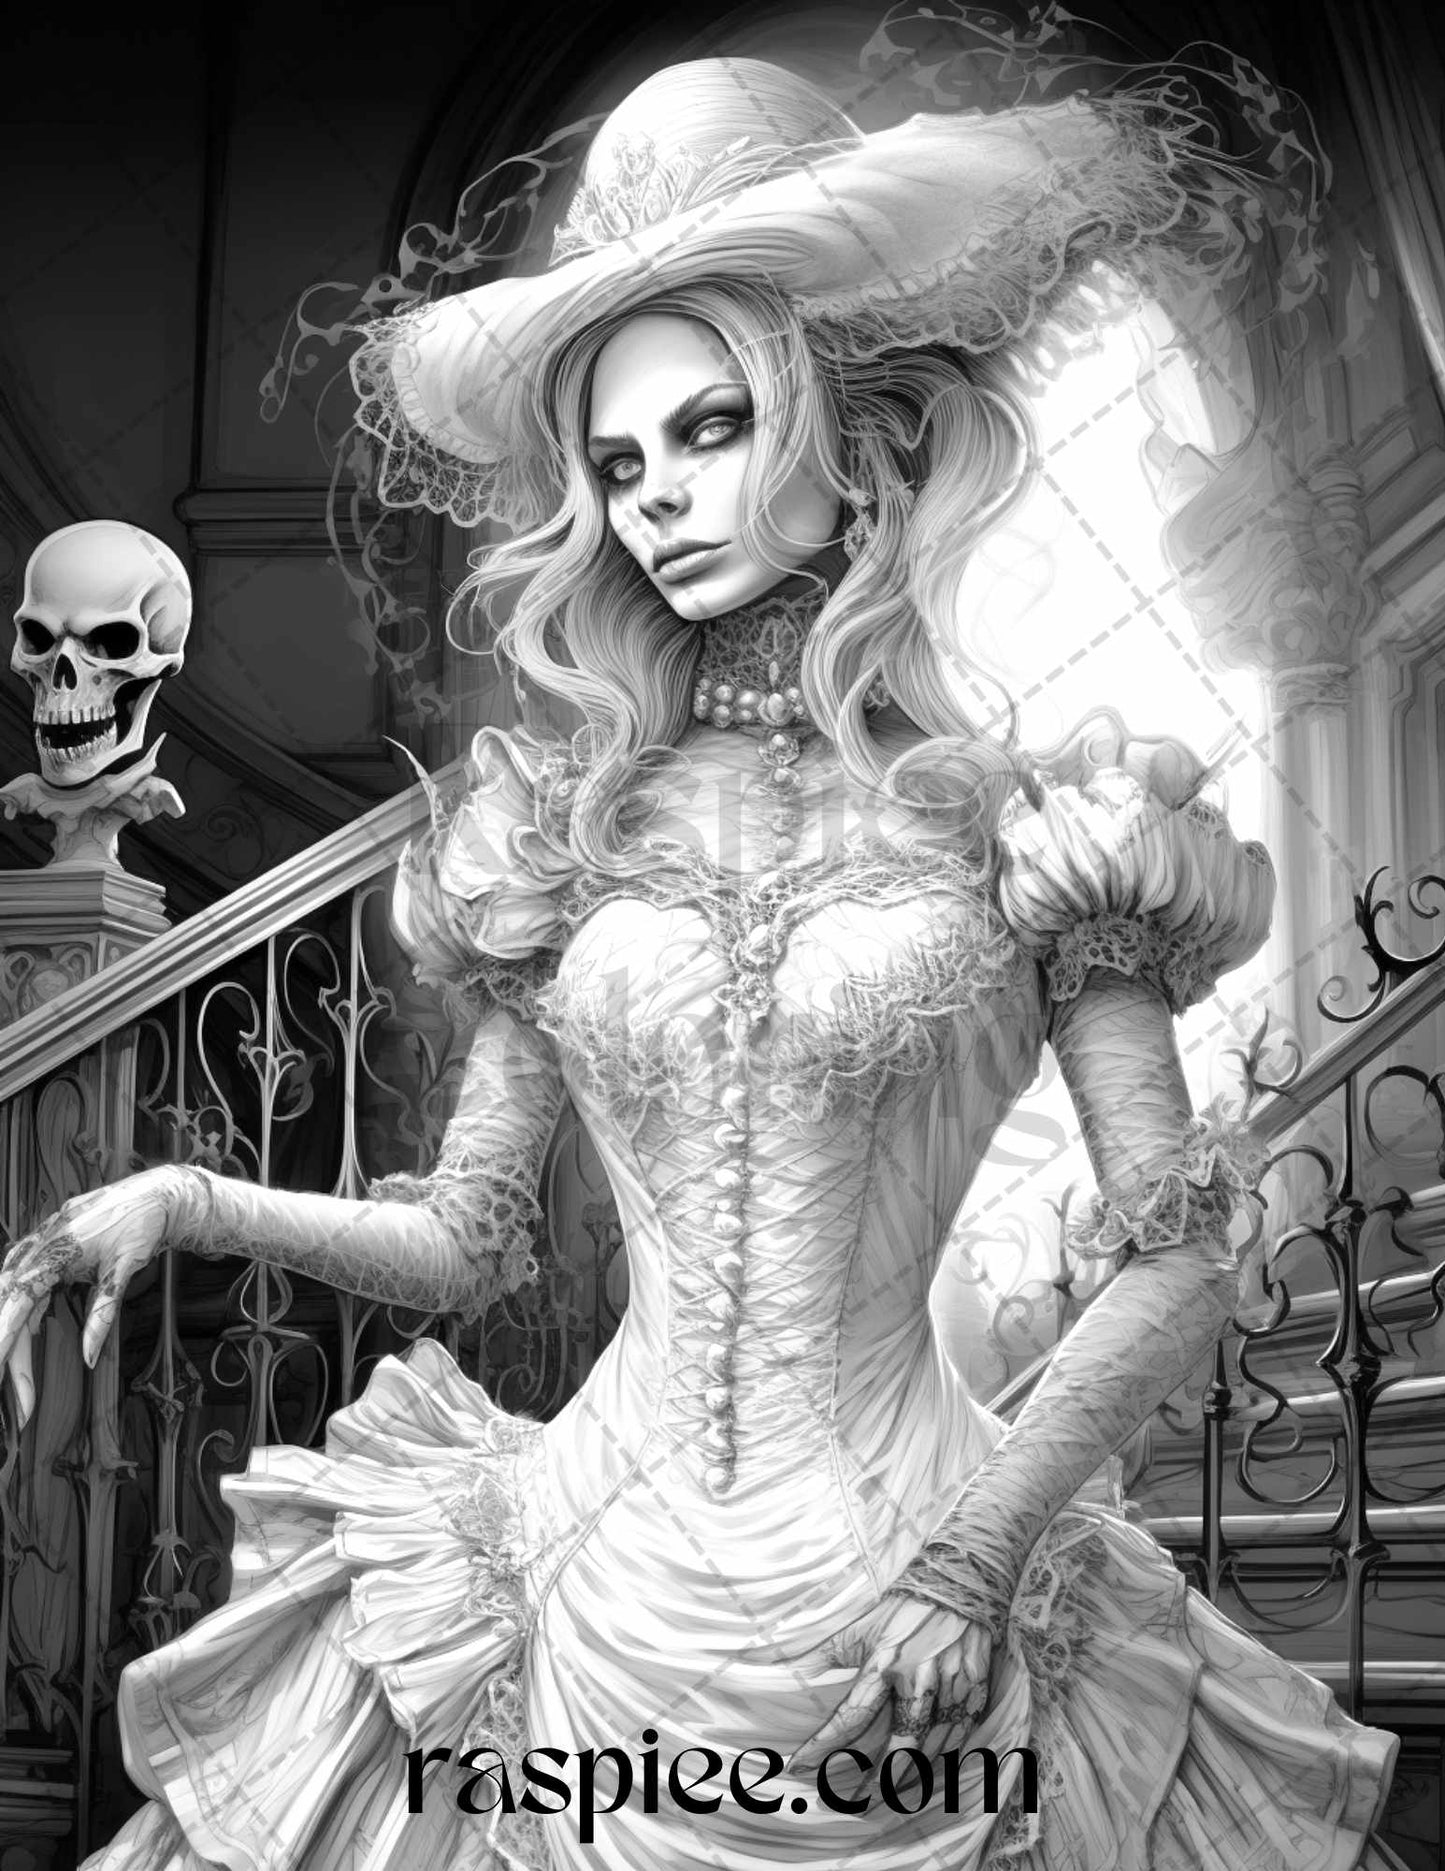 Halloween grayscale coloring pages for adults, Victorian era spooky coloring printables, Eerie Victorian era coloring pages, Halloween decor in black and white, Adult coloring for Halloween, Creepy Victorian era coloring sheets, High-quality grayscale Halloween printables, Halloween Grayscale Coloring Pages